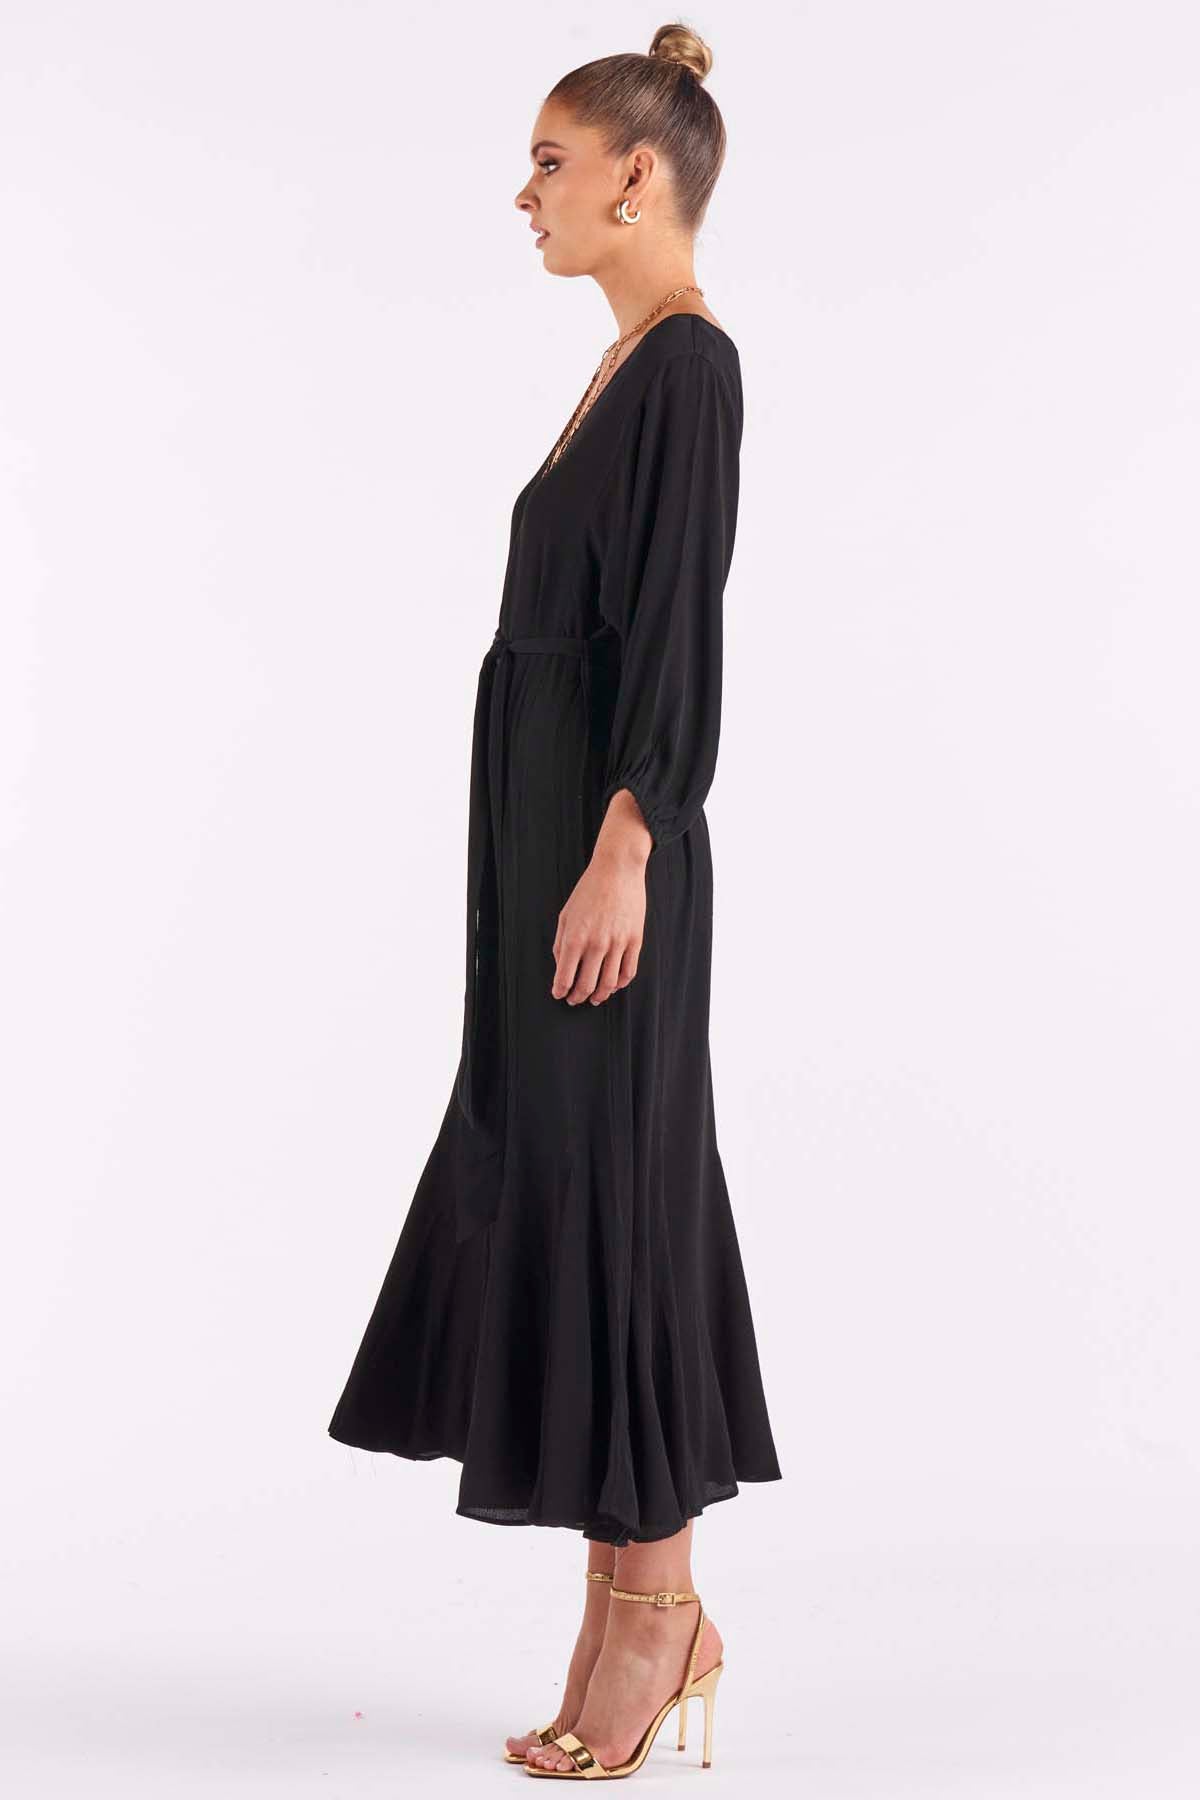 Fate + Becker Only Yesterday Dress in Black - Hey Sara